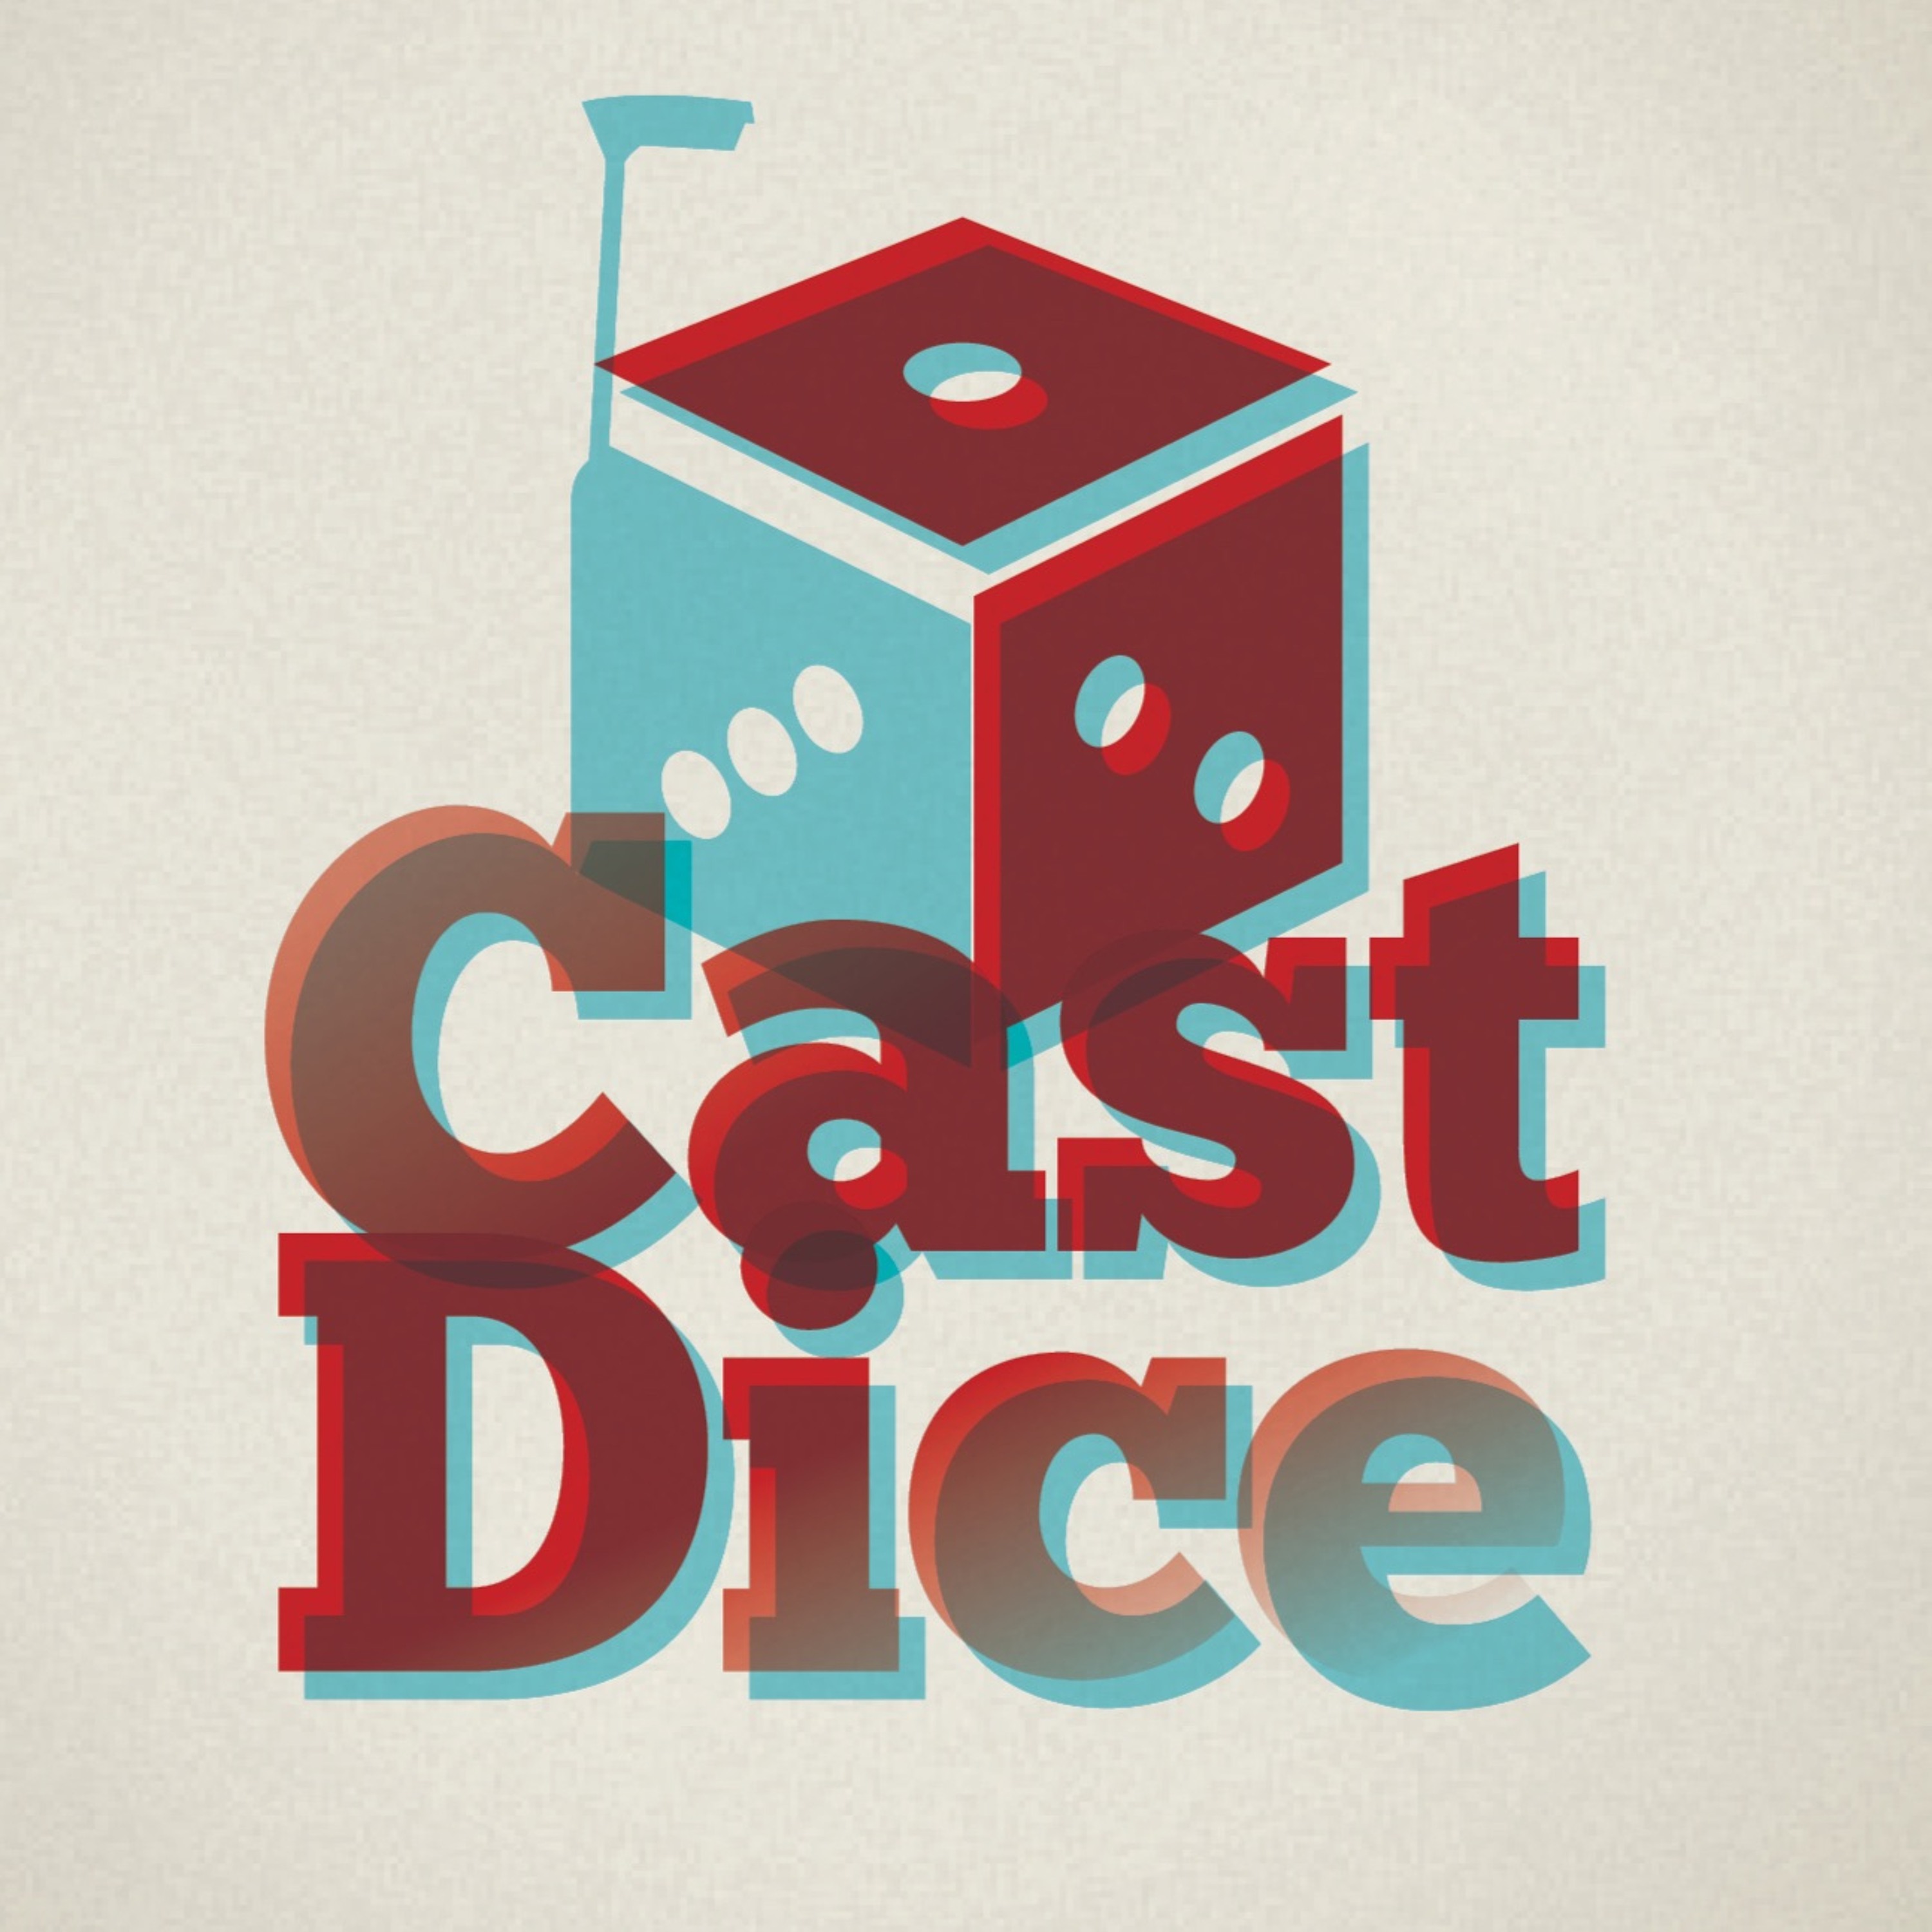 Cast Dice Podcast, Episode 22- Talking Star Wars Games With WWPD's Steve MacLauchlan